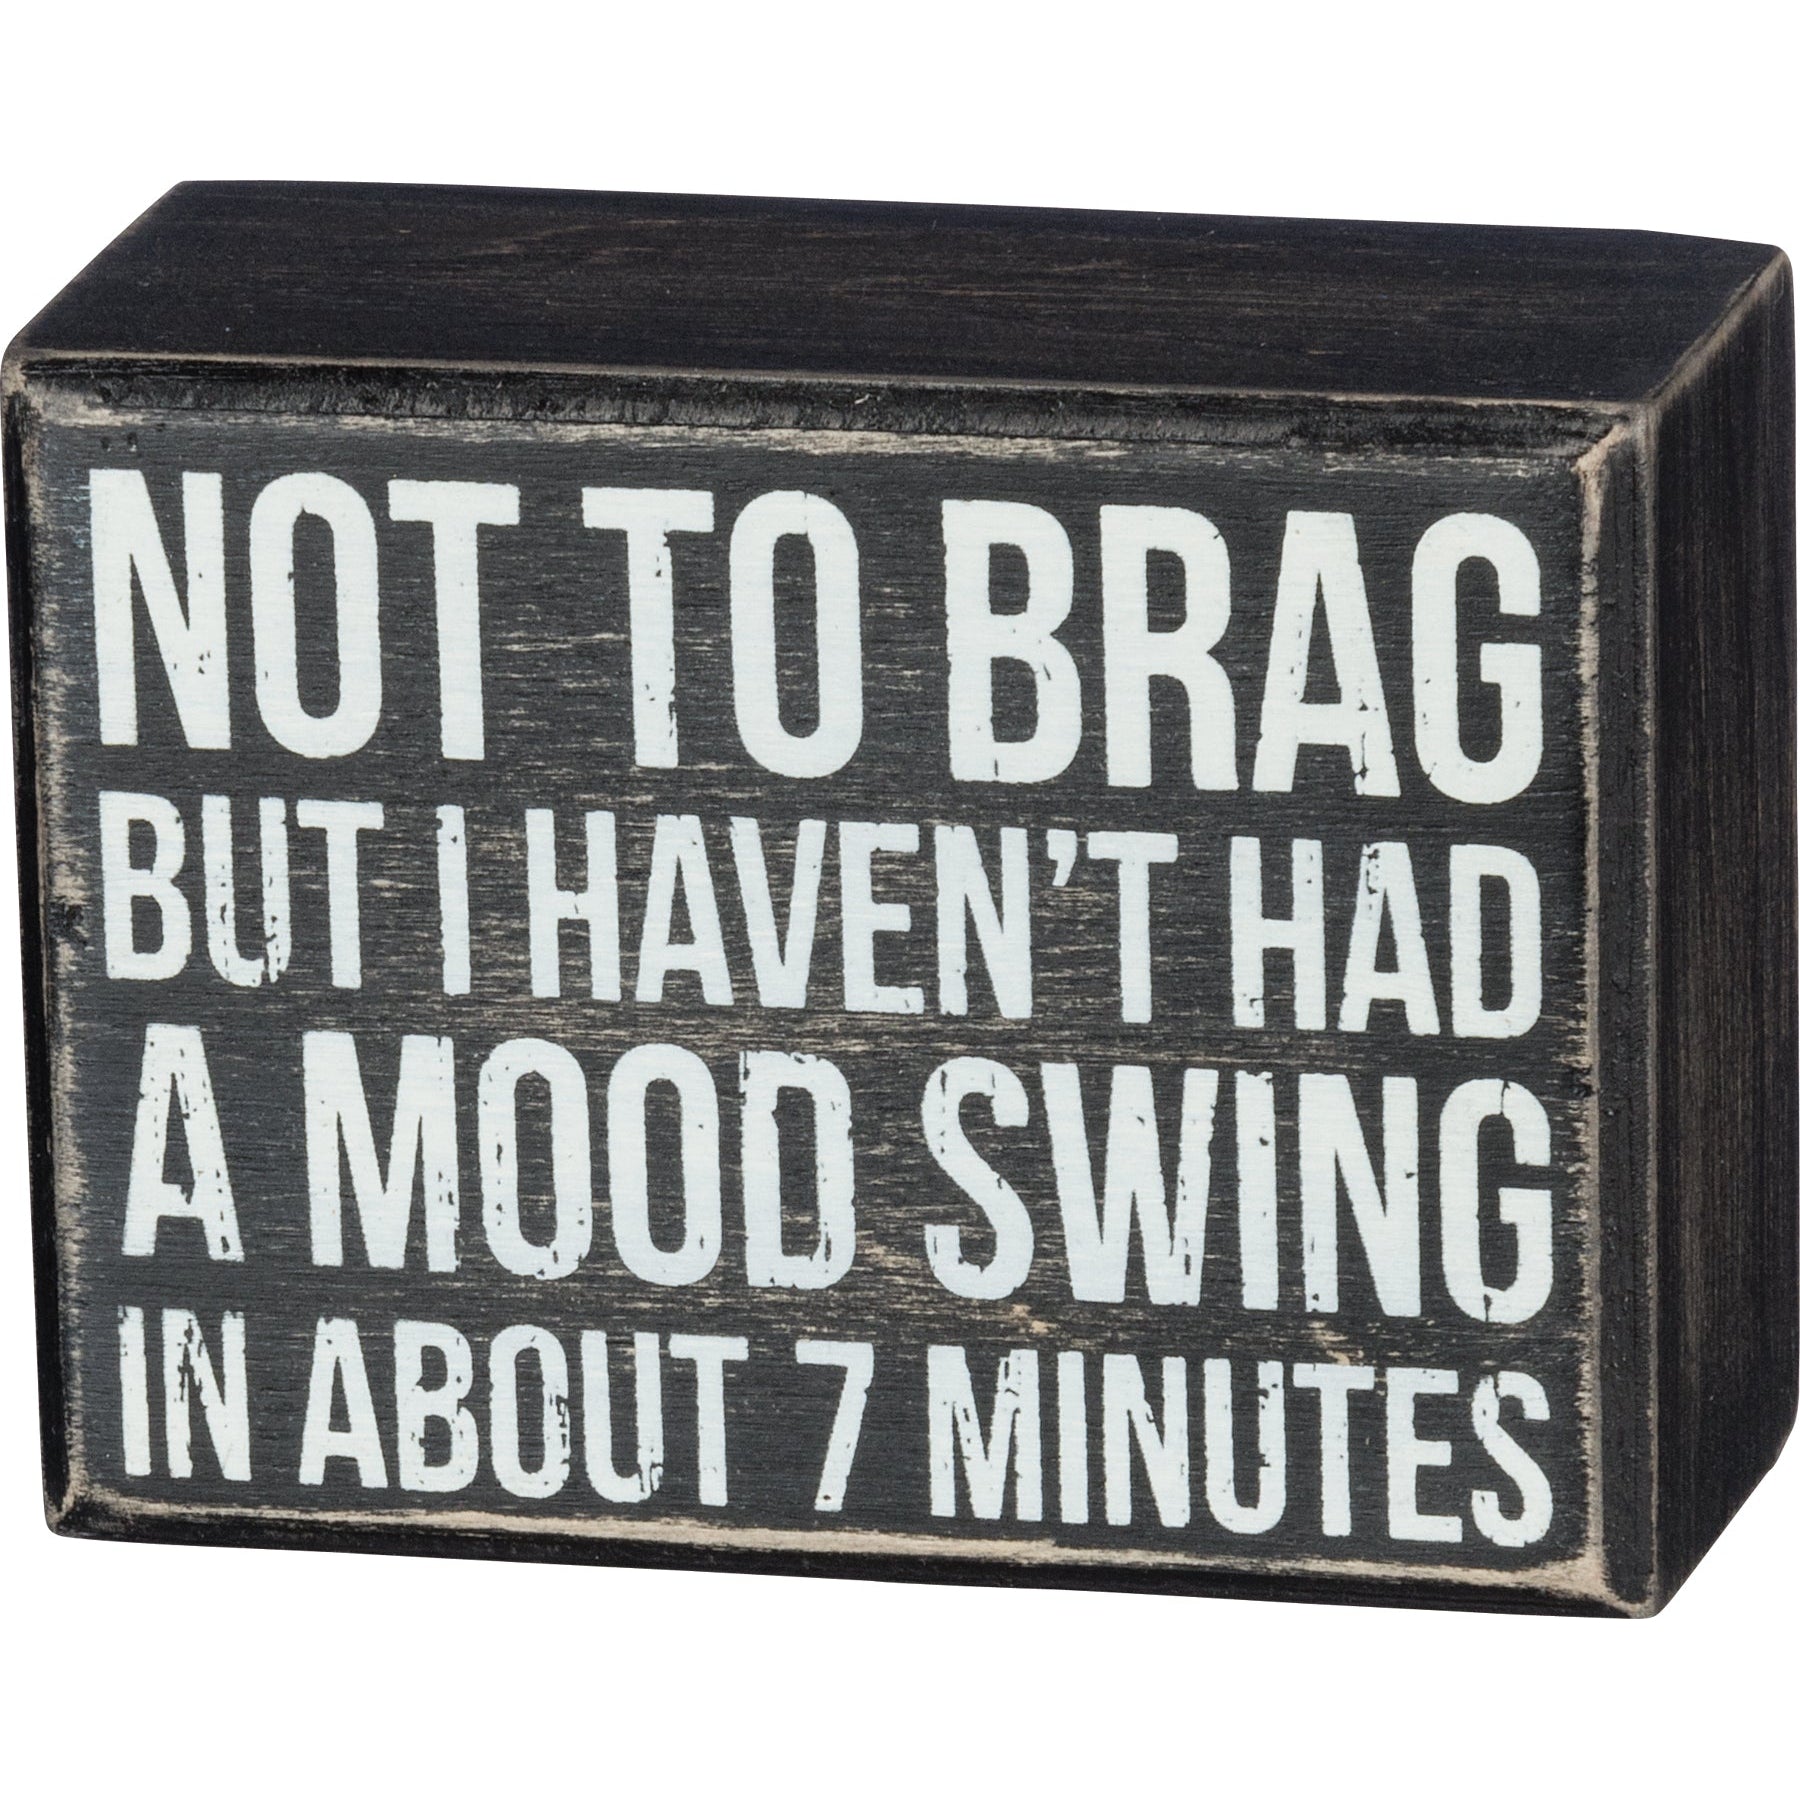 Not To Brag But I Haven't Had A Mood Swing In About 7 Minutes Wooden Box Sign